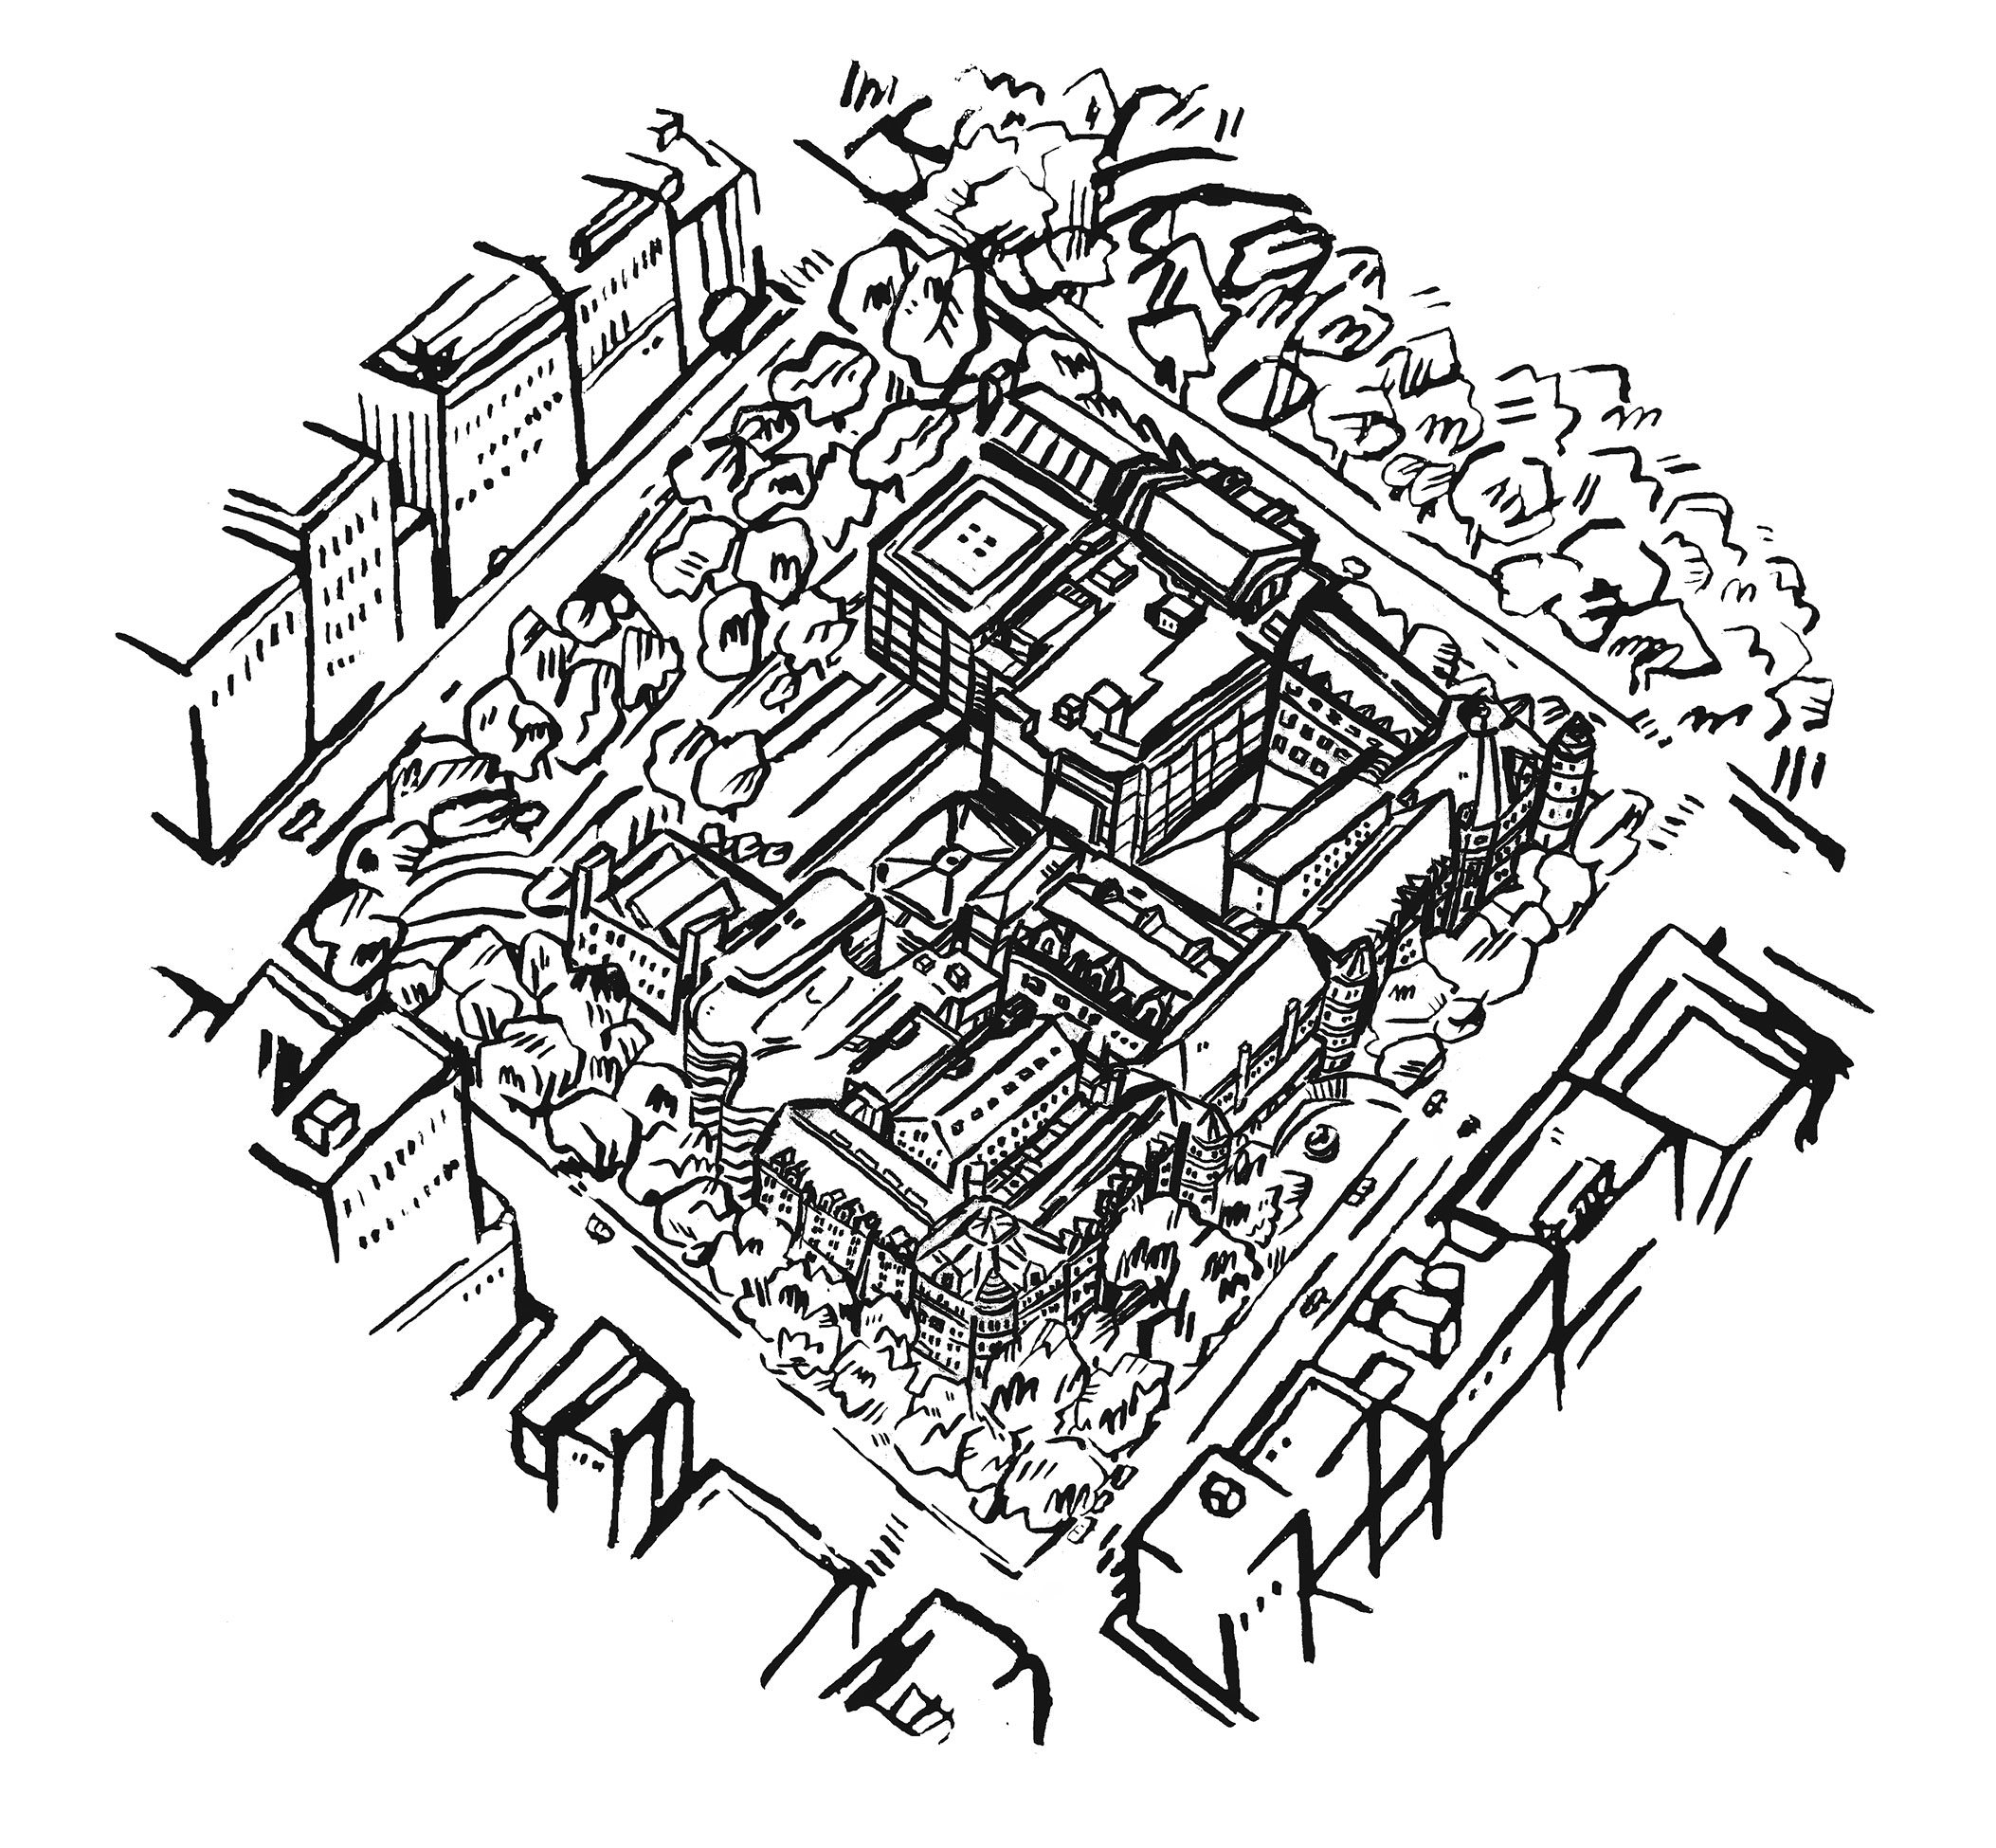 Aerial axonometric drawing of the AMNH complex